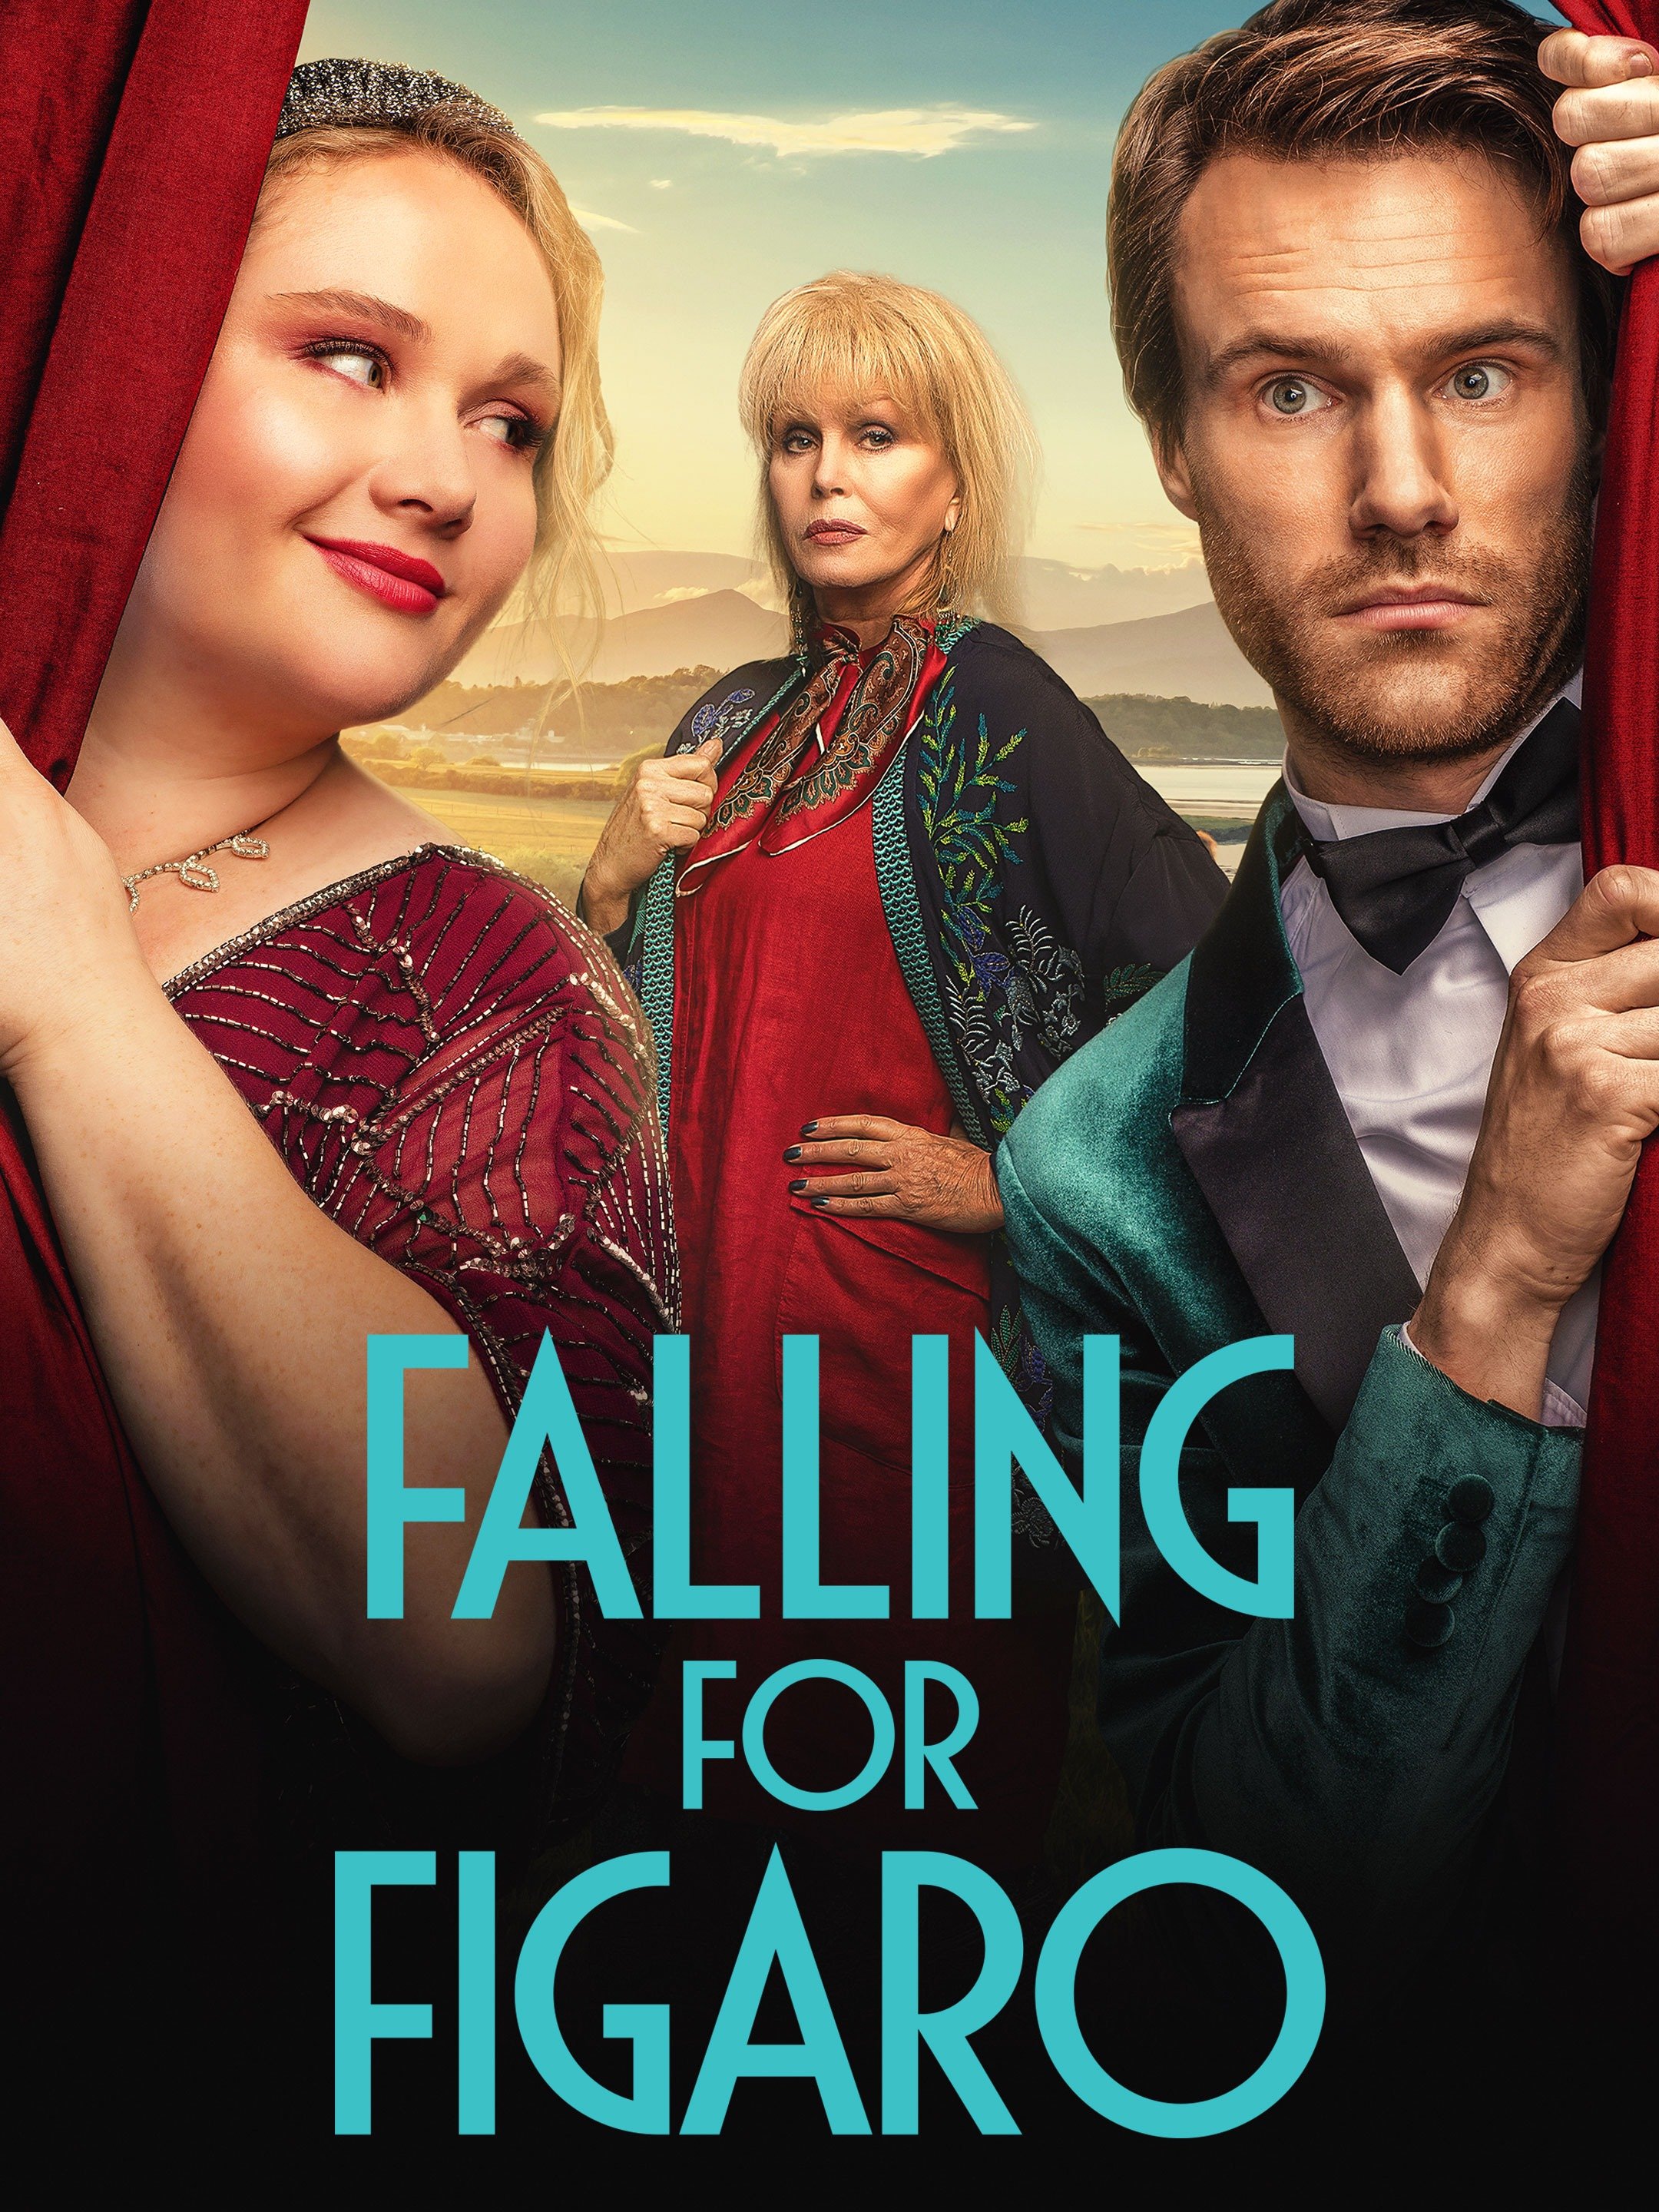 "Falling for Figaro photo 7"